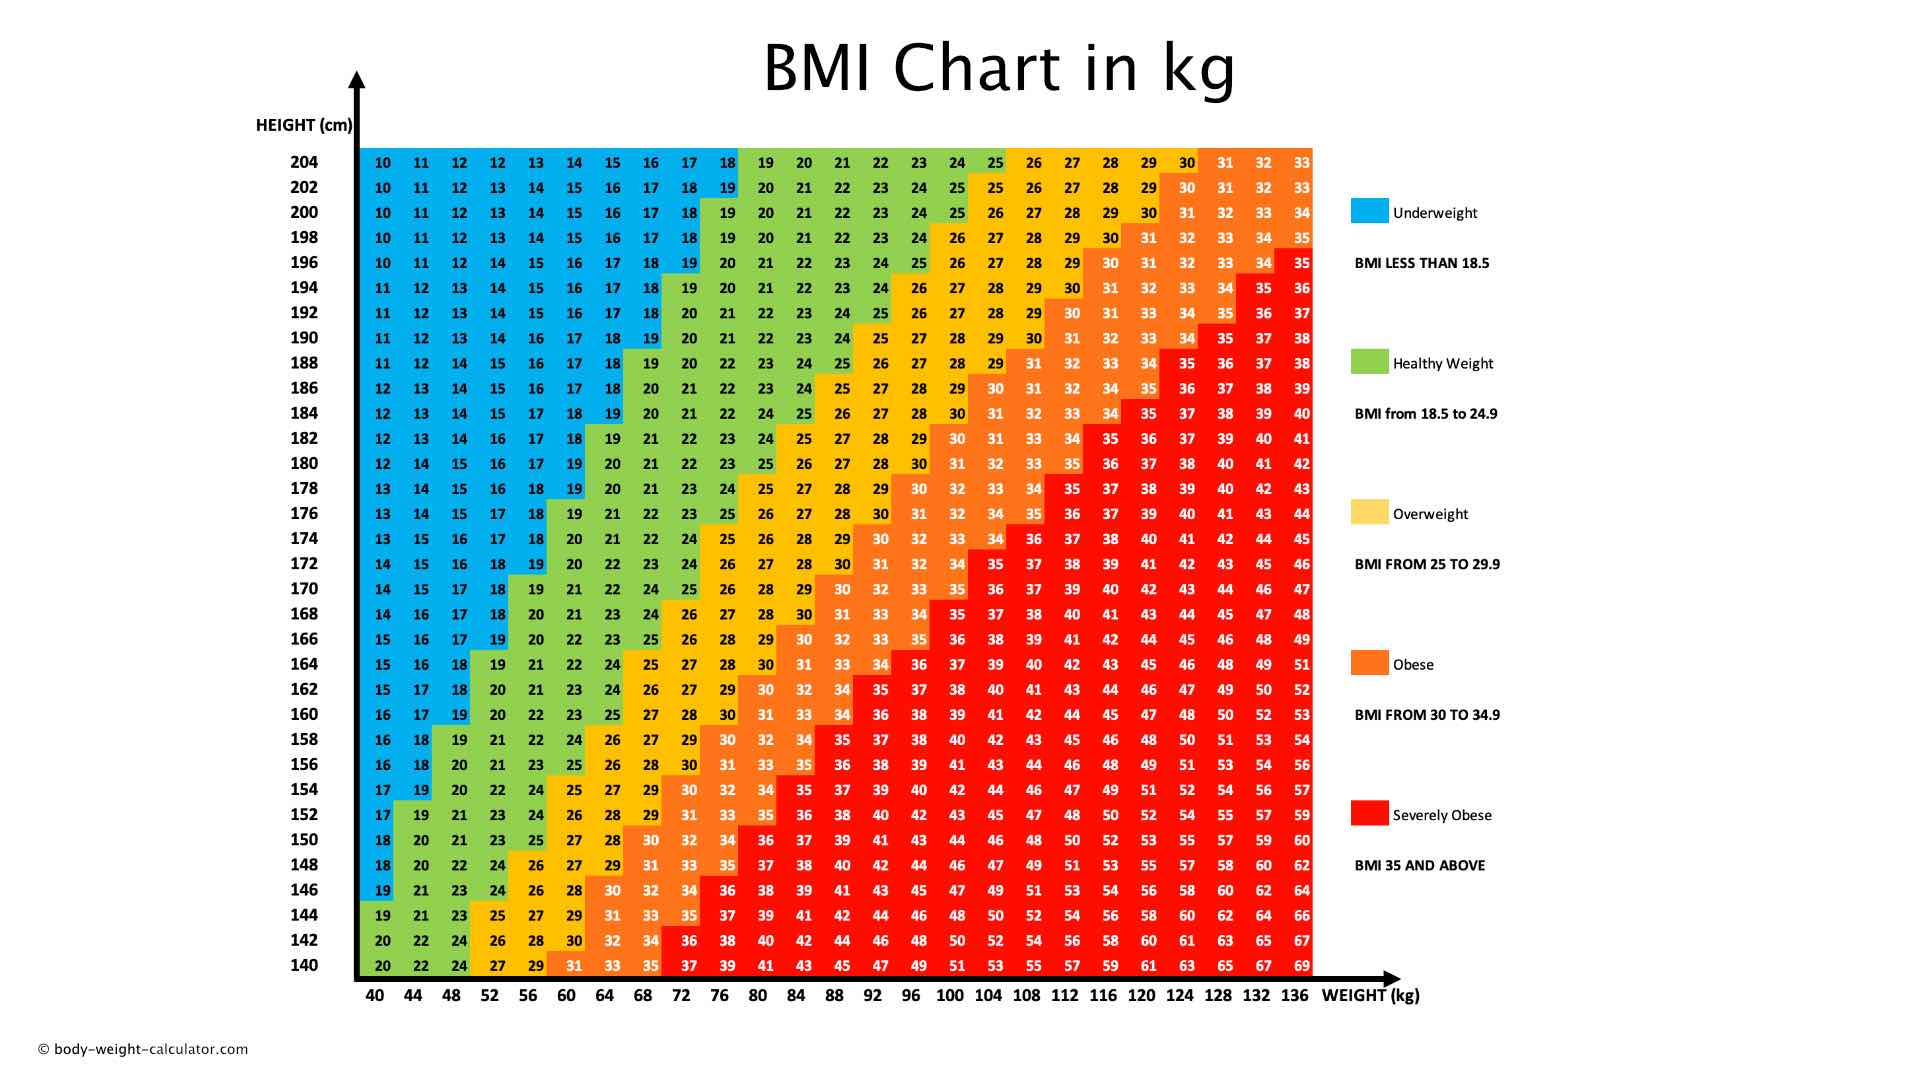 BMI chart for males by age in India - 2022